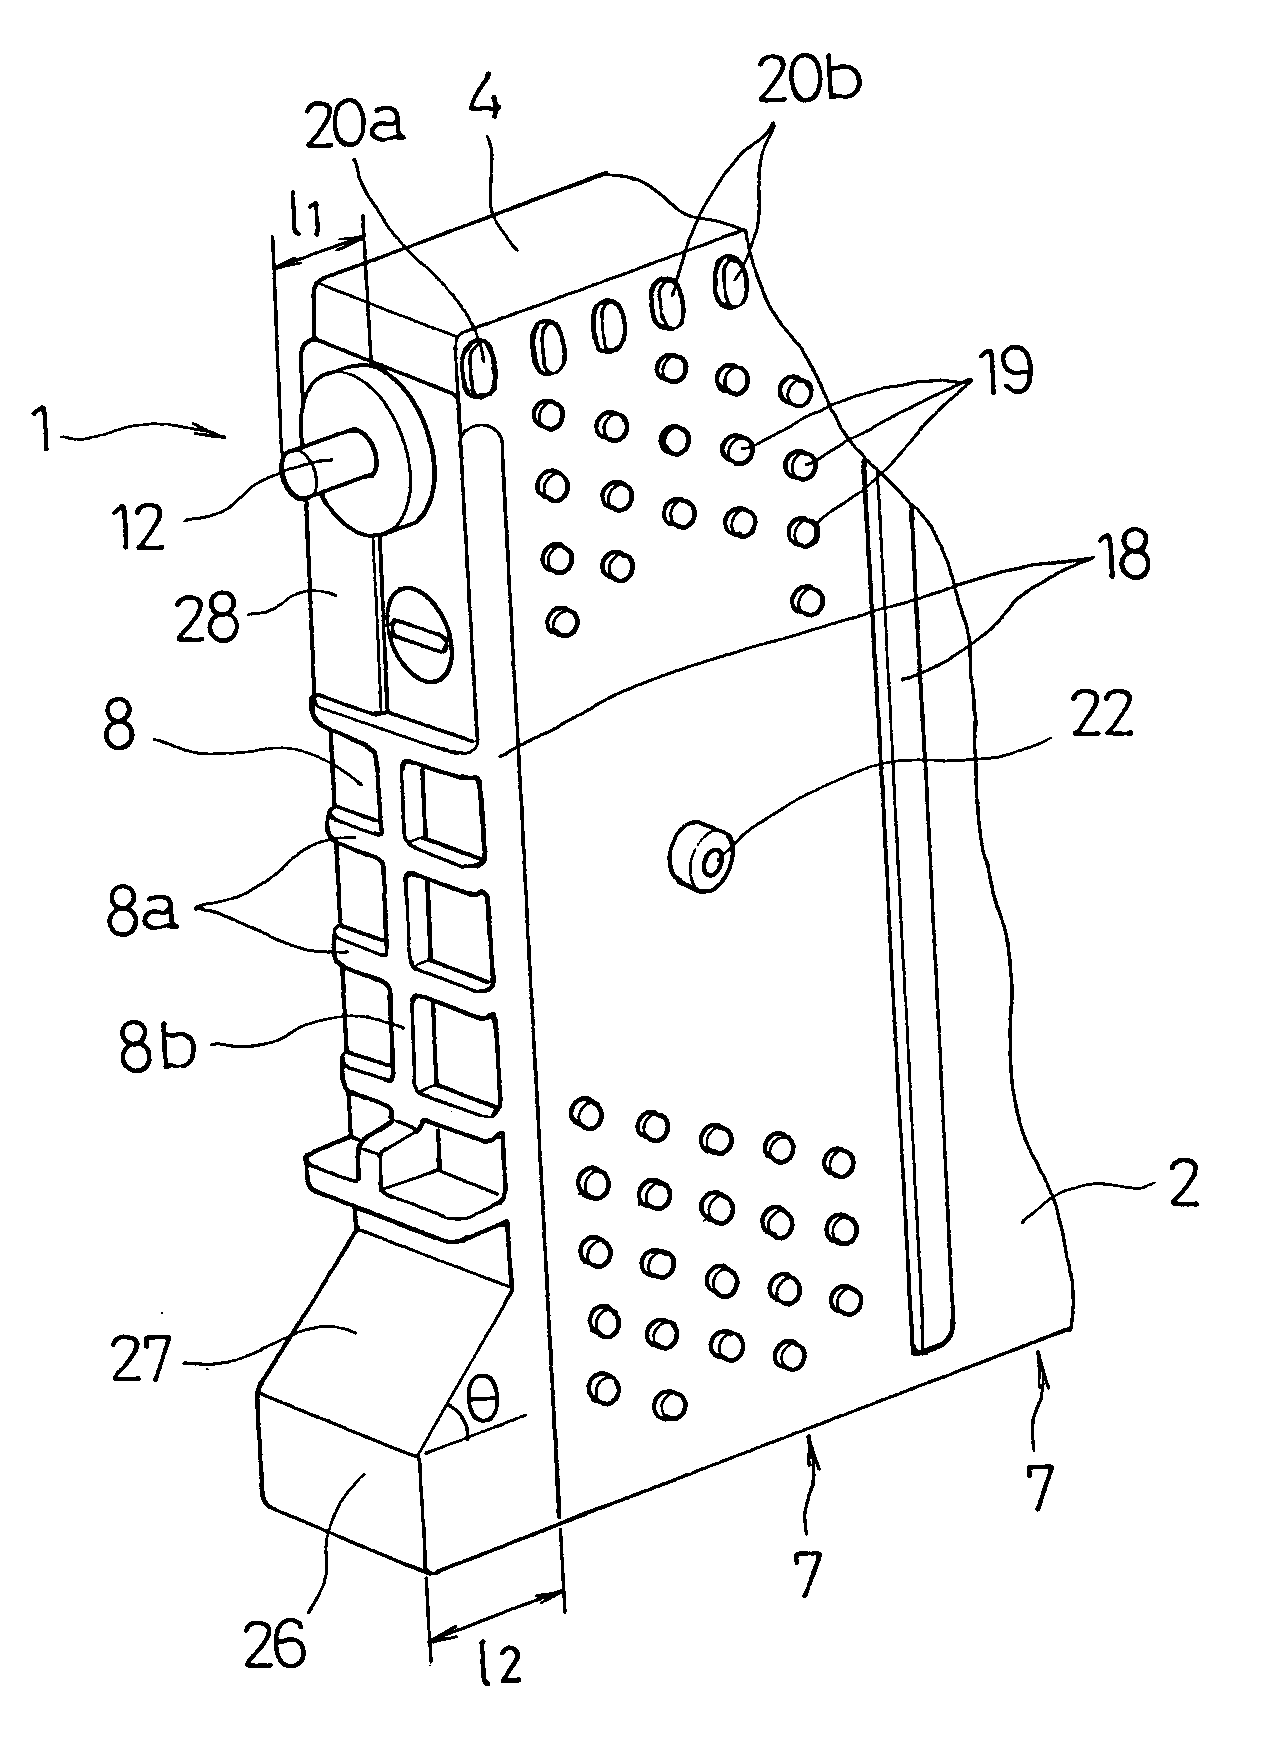 Structure for electrode terminals of battery module